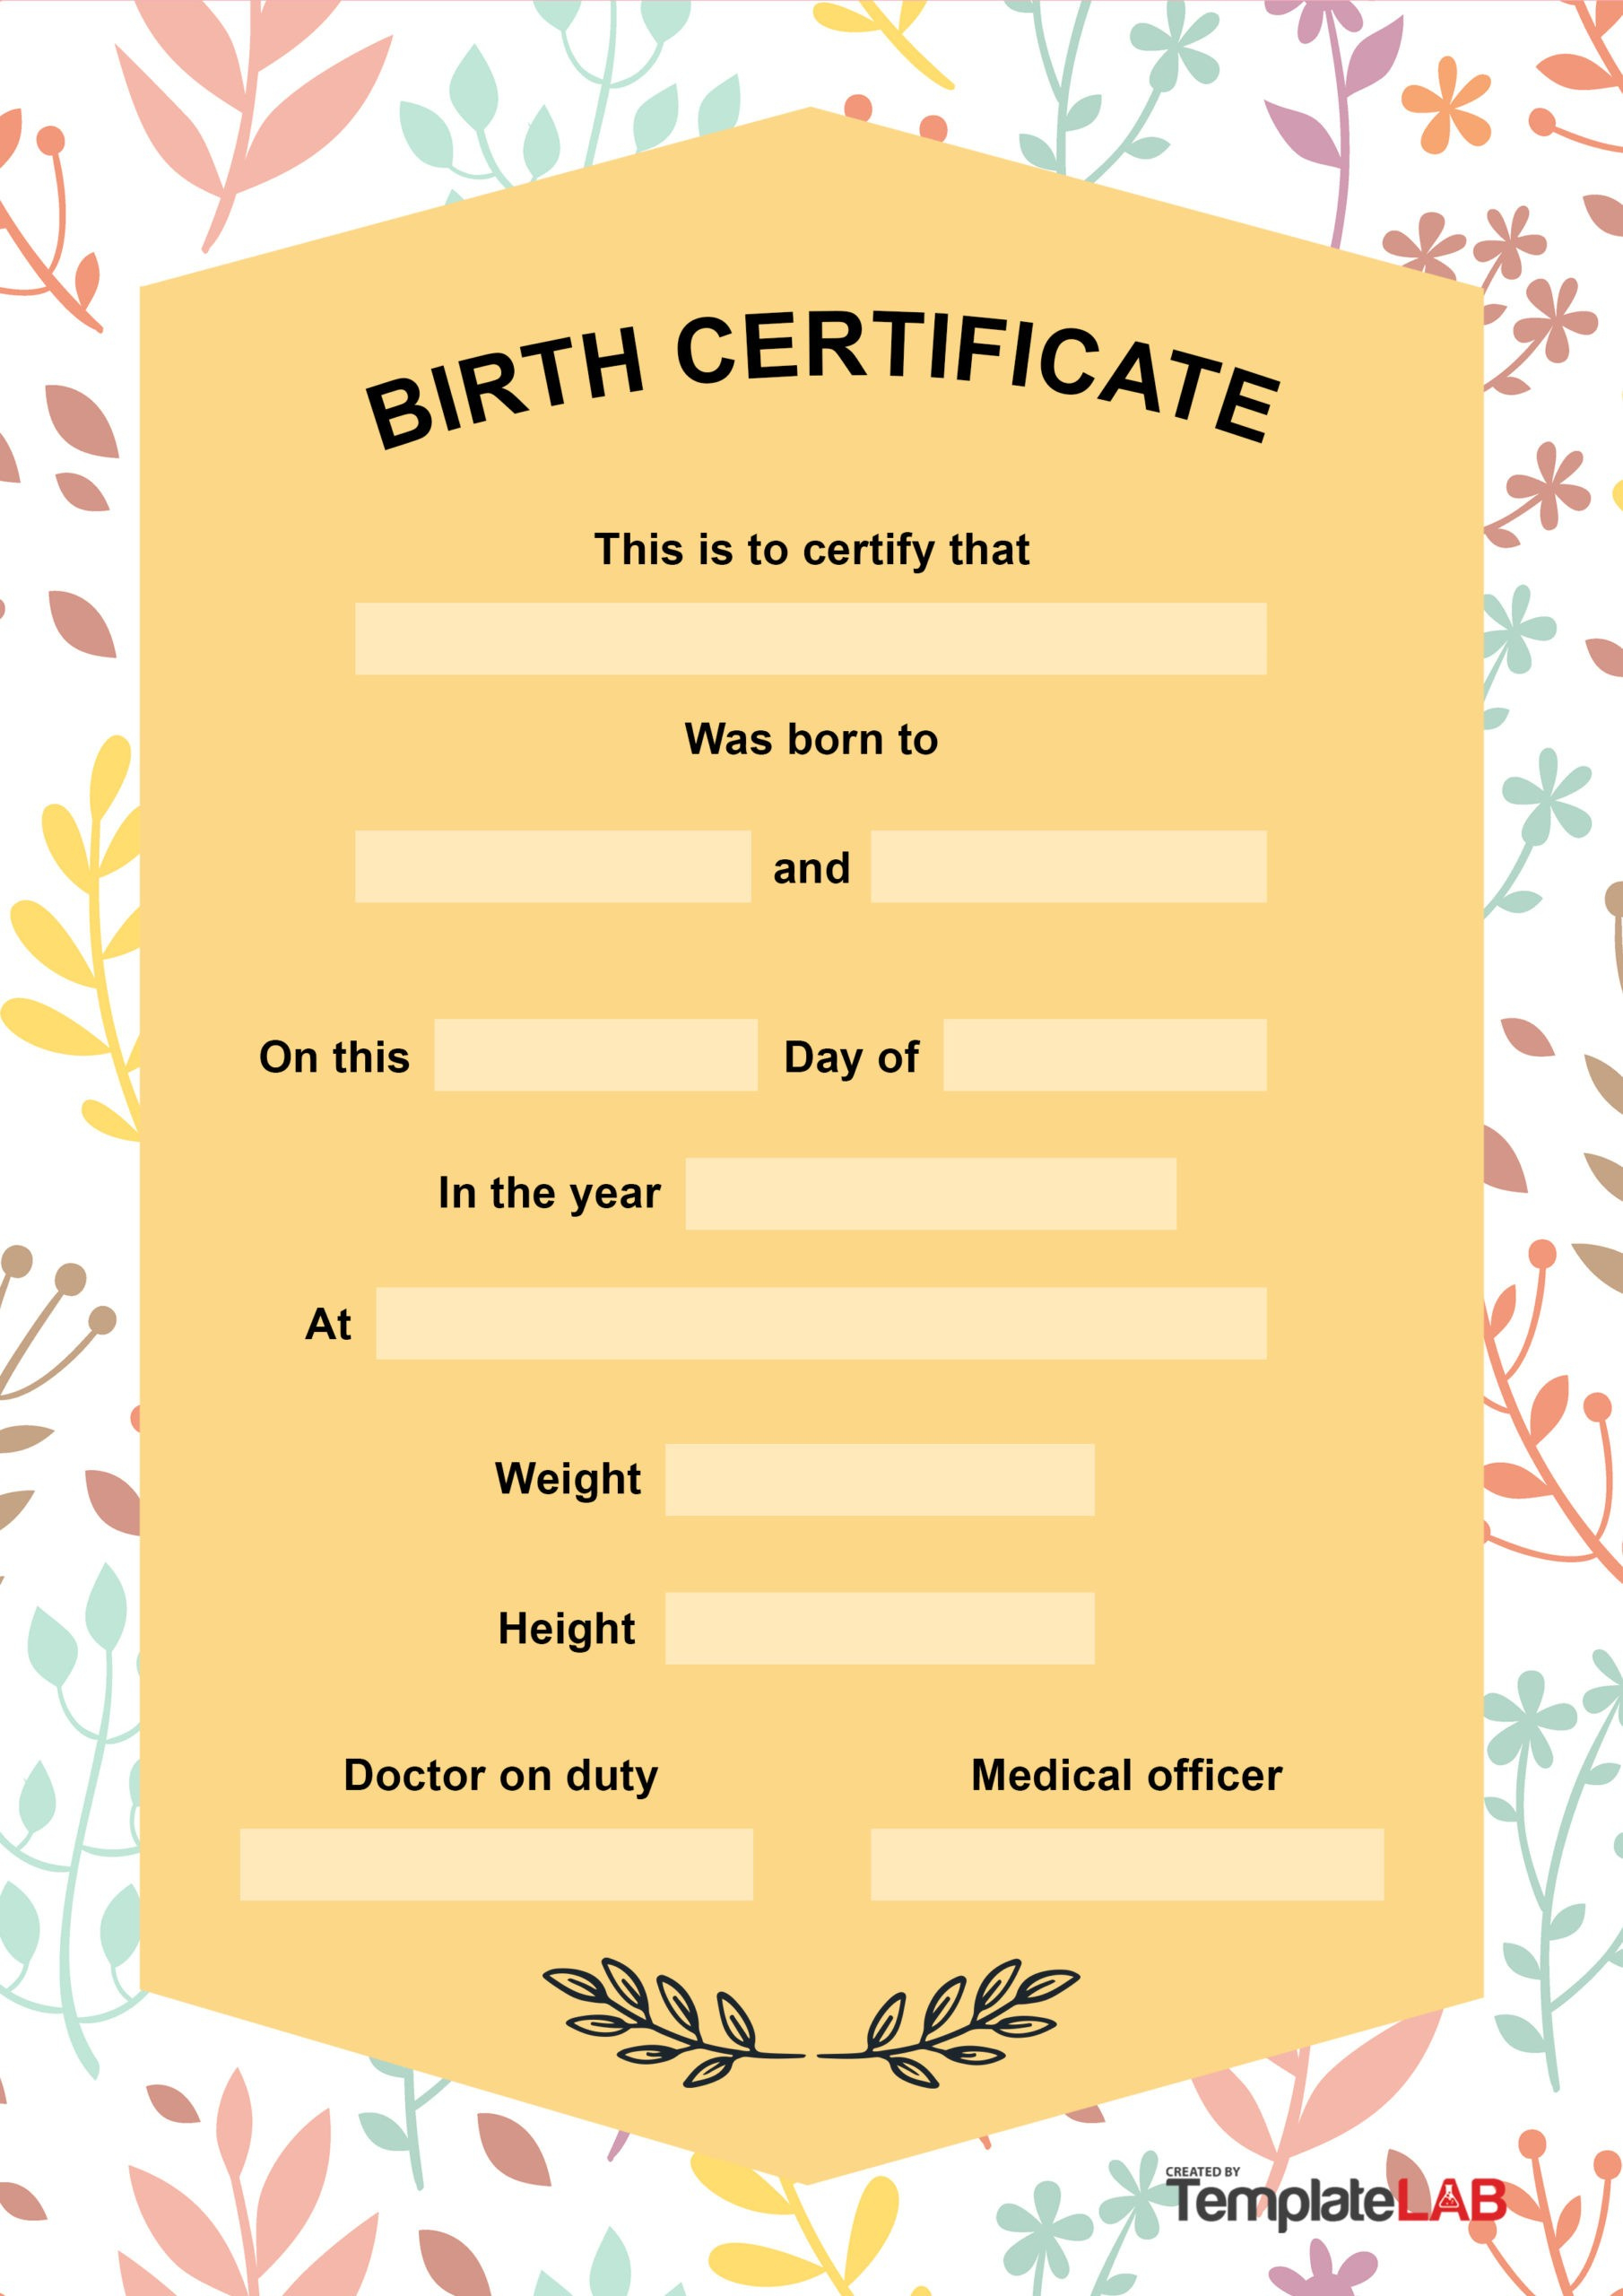 27 Birth Certificate Templates (Word, Ppt &amp; Pdf) ᐅ Templatelab inside Fresh Birth Certificate Templates For Word